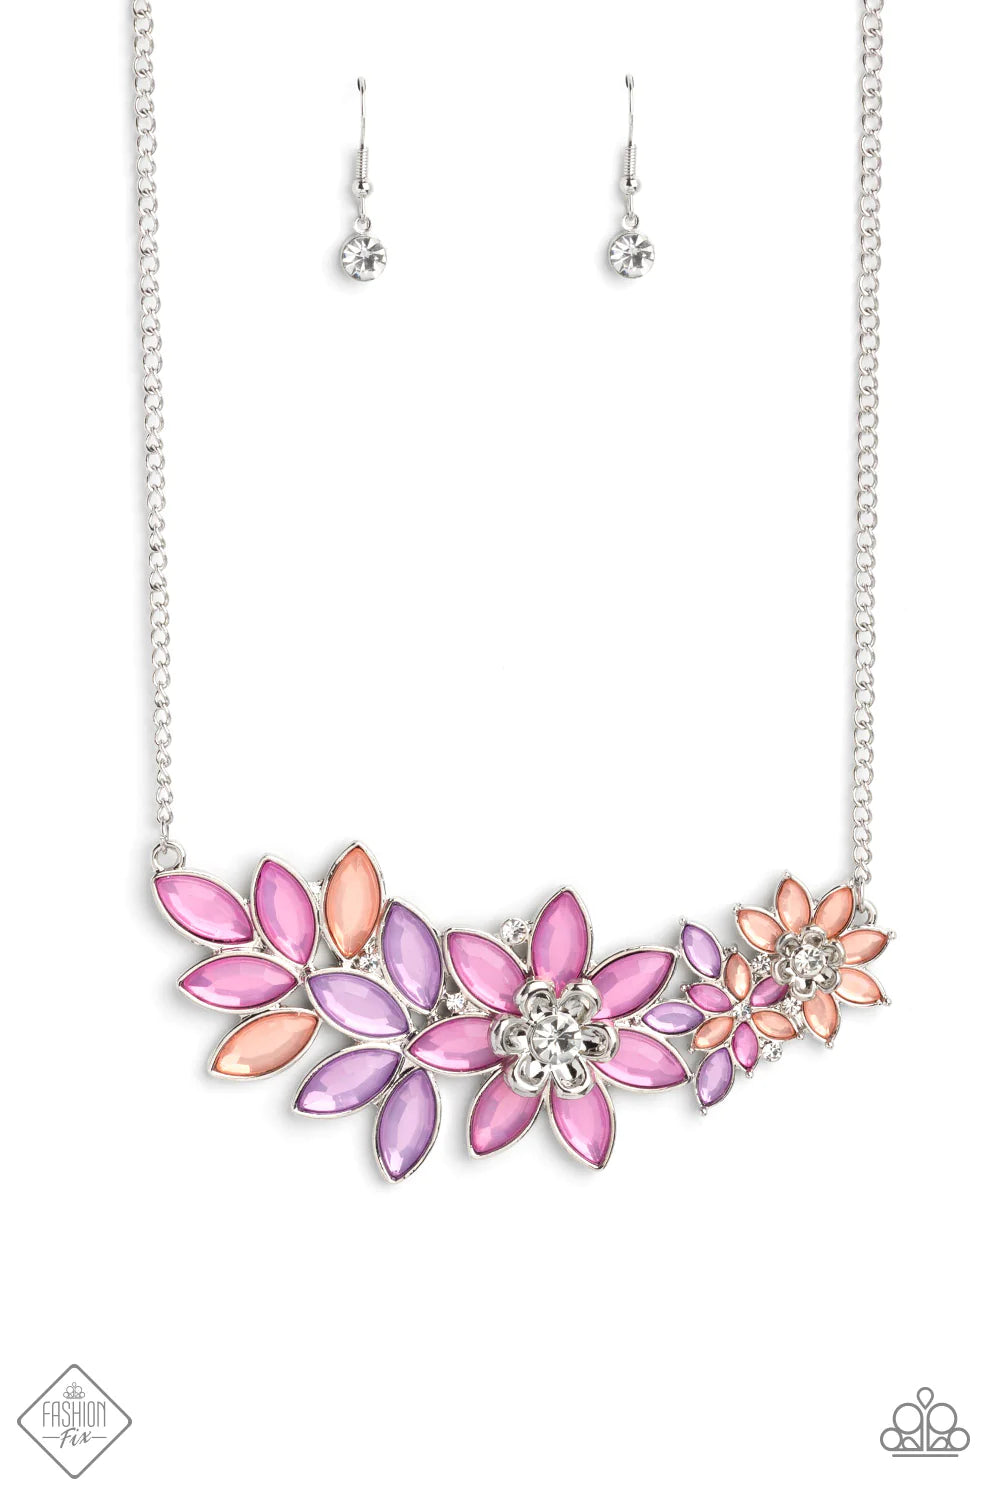 GARLAND Over - Multi Necklace (GM-0323)